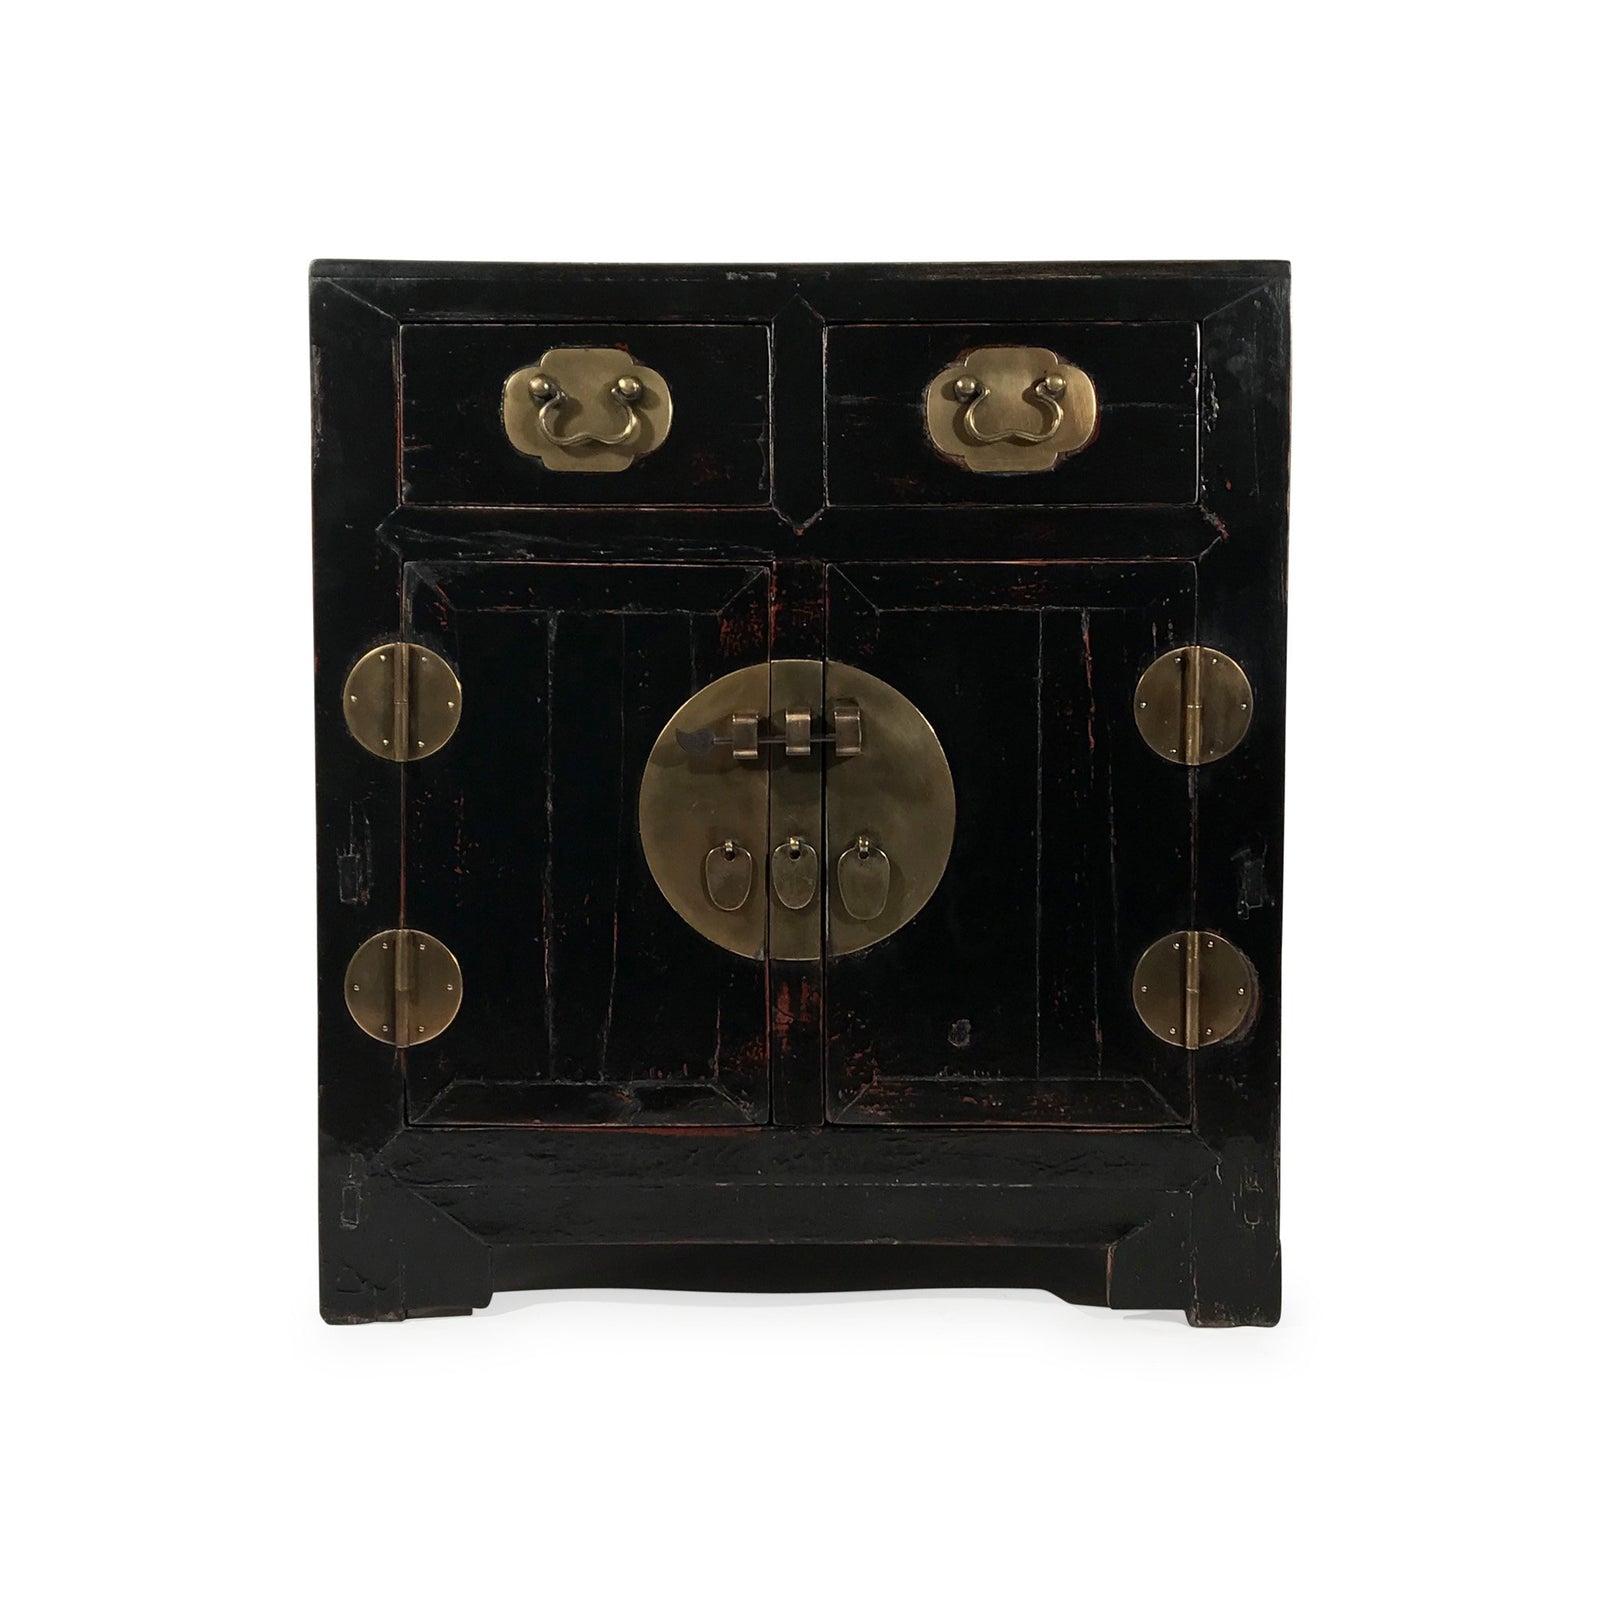 Black Lacquer Sideboard From Tianjin - 19thC - 83 x 48 x 91 (wxdxh cms) - C1496V2